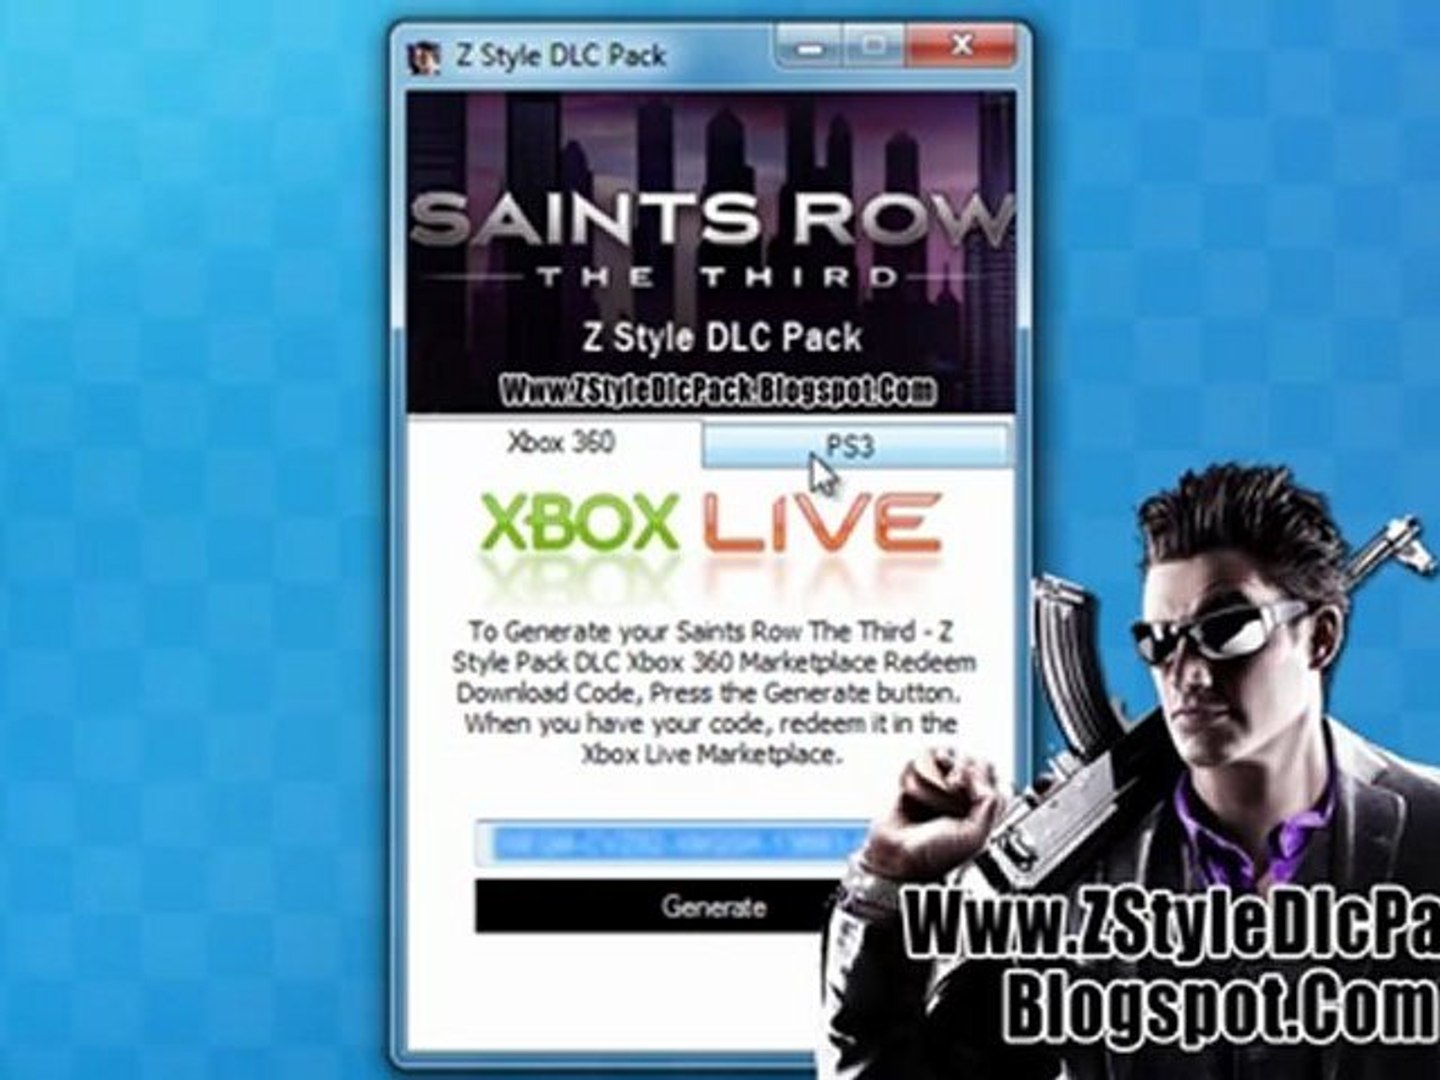 Saints Row The Third Z Style Pack DLC Free On Xbox 360, PS3.